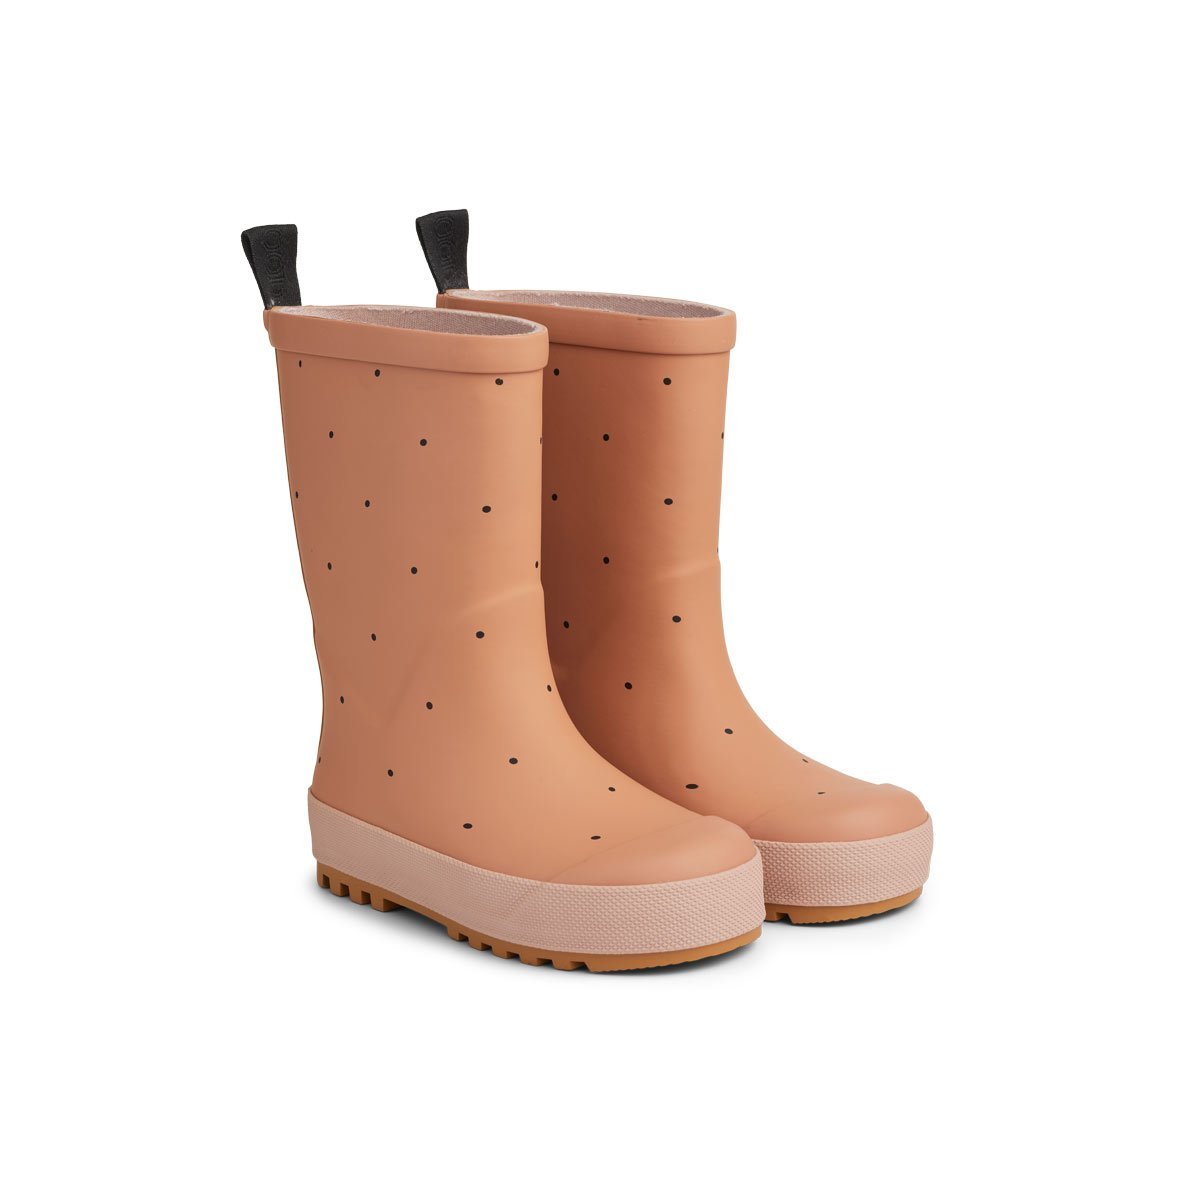 Liewood River Rain Boot in Classic Dot Tuscany Rose Mix - Scandibørn